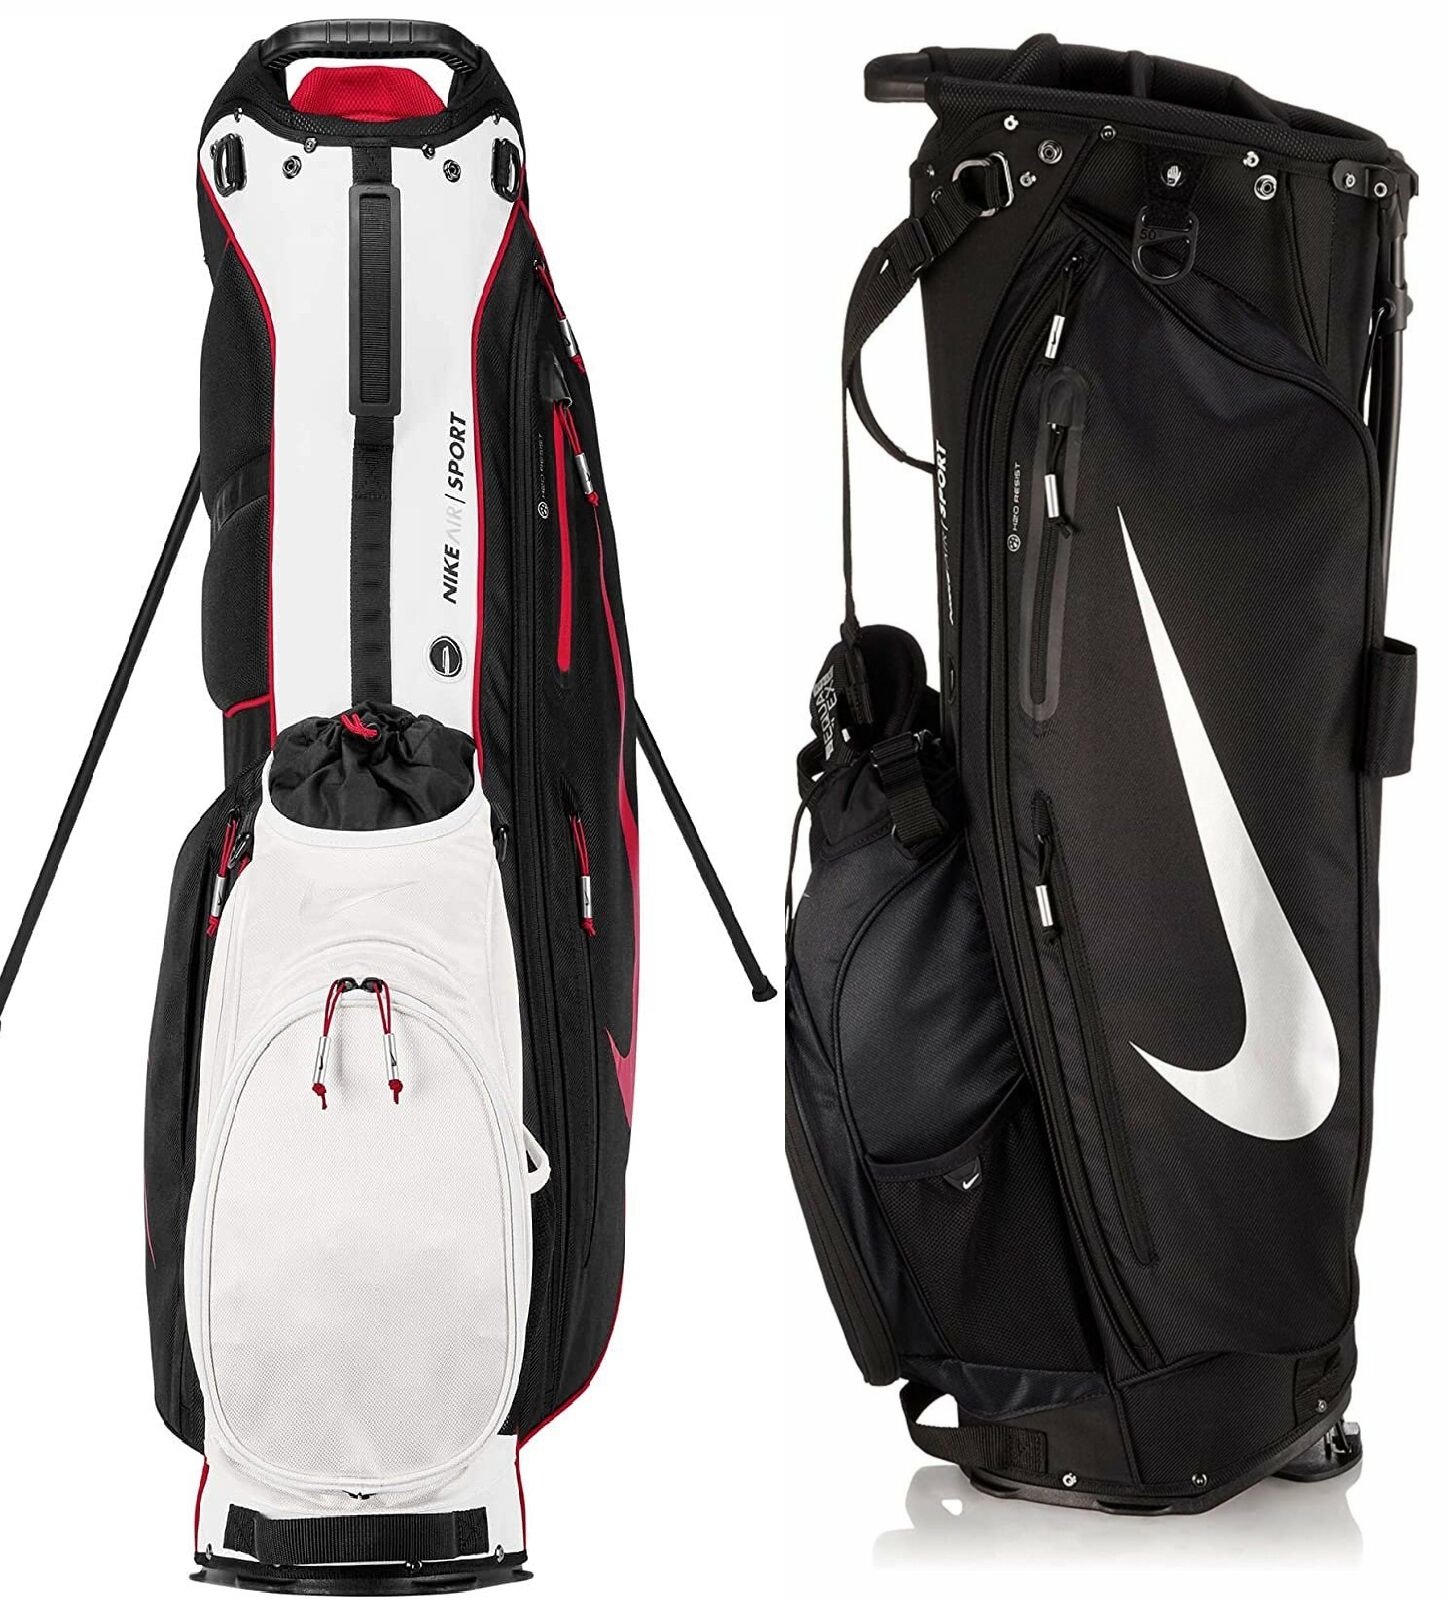 Nike Air Sport Golf Carry Stand Cart Golf Bag 6 Dividers New Fast Free Shipping | eBay